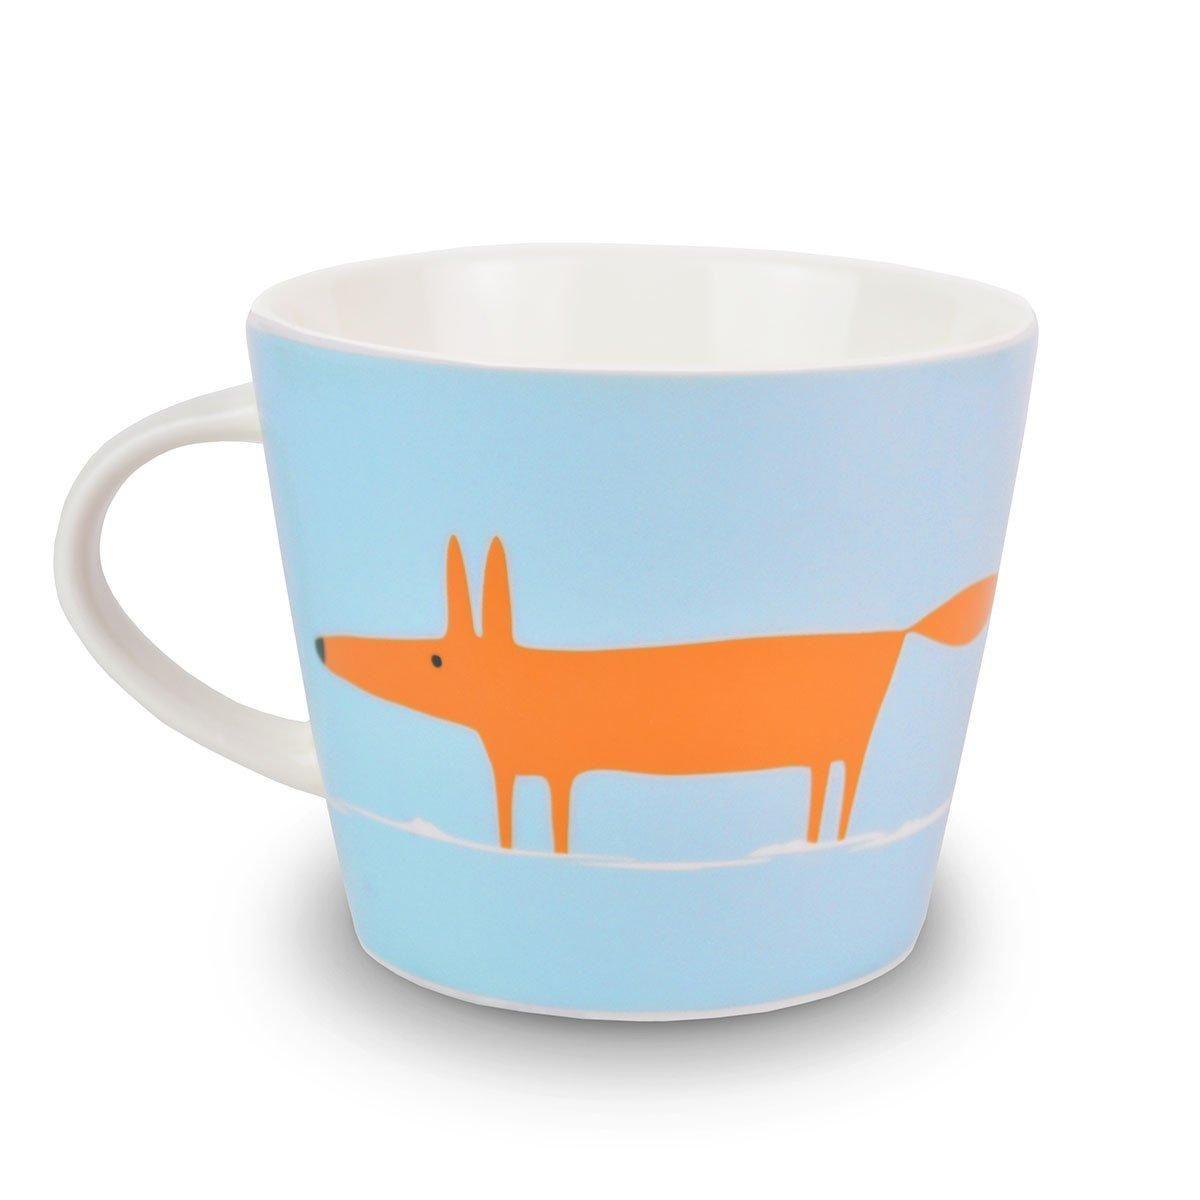  Mugs And Cups SC-0020 